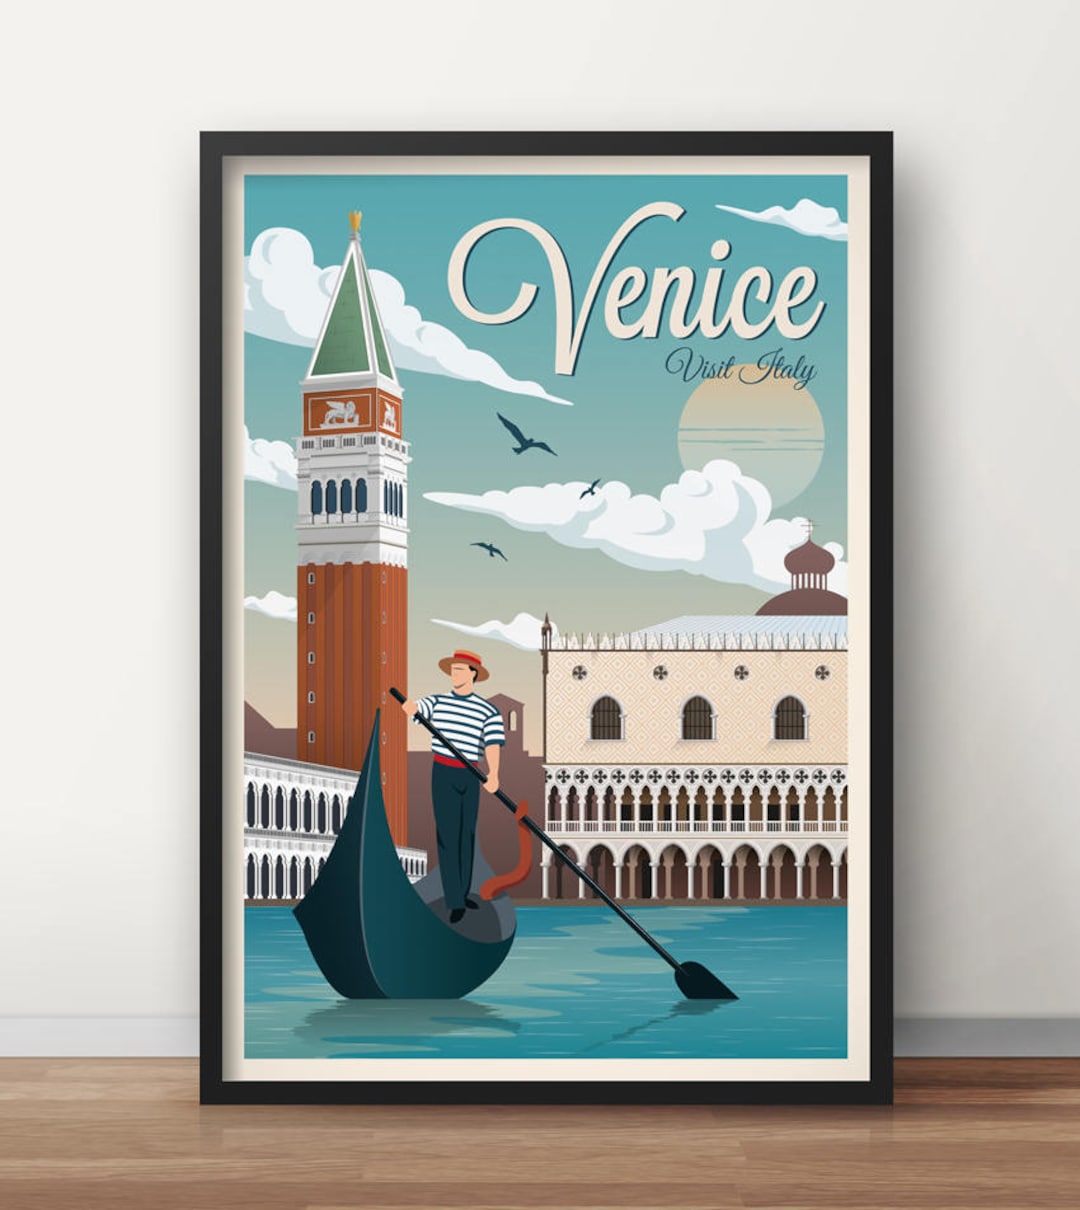 Travel Posters Venice - Italy City of Water Travel Poster, Retro, Vintage  Poster